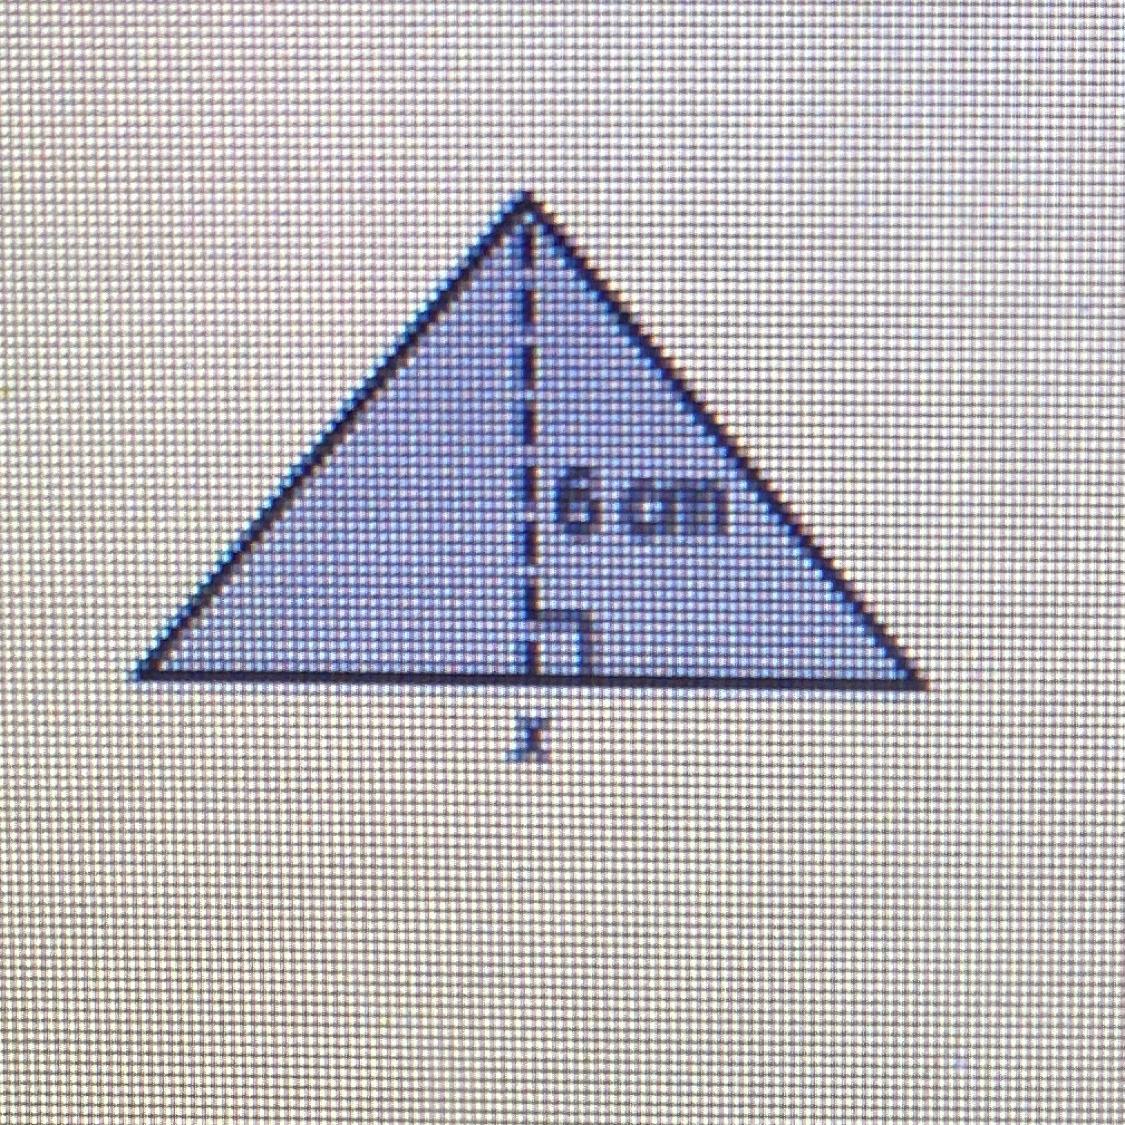 The Area Of A Triangle Is 30 Square Inches. What Is The Length Of The Base If The Height Is 6 Centimeters?